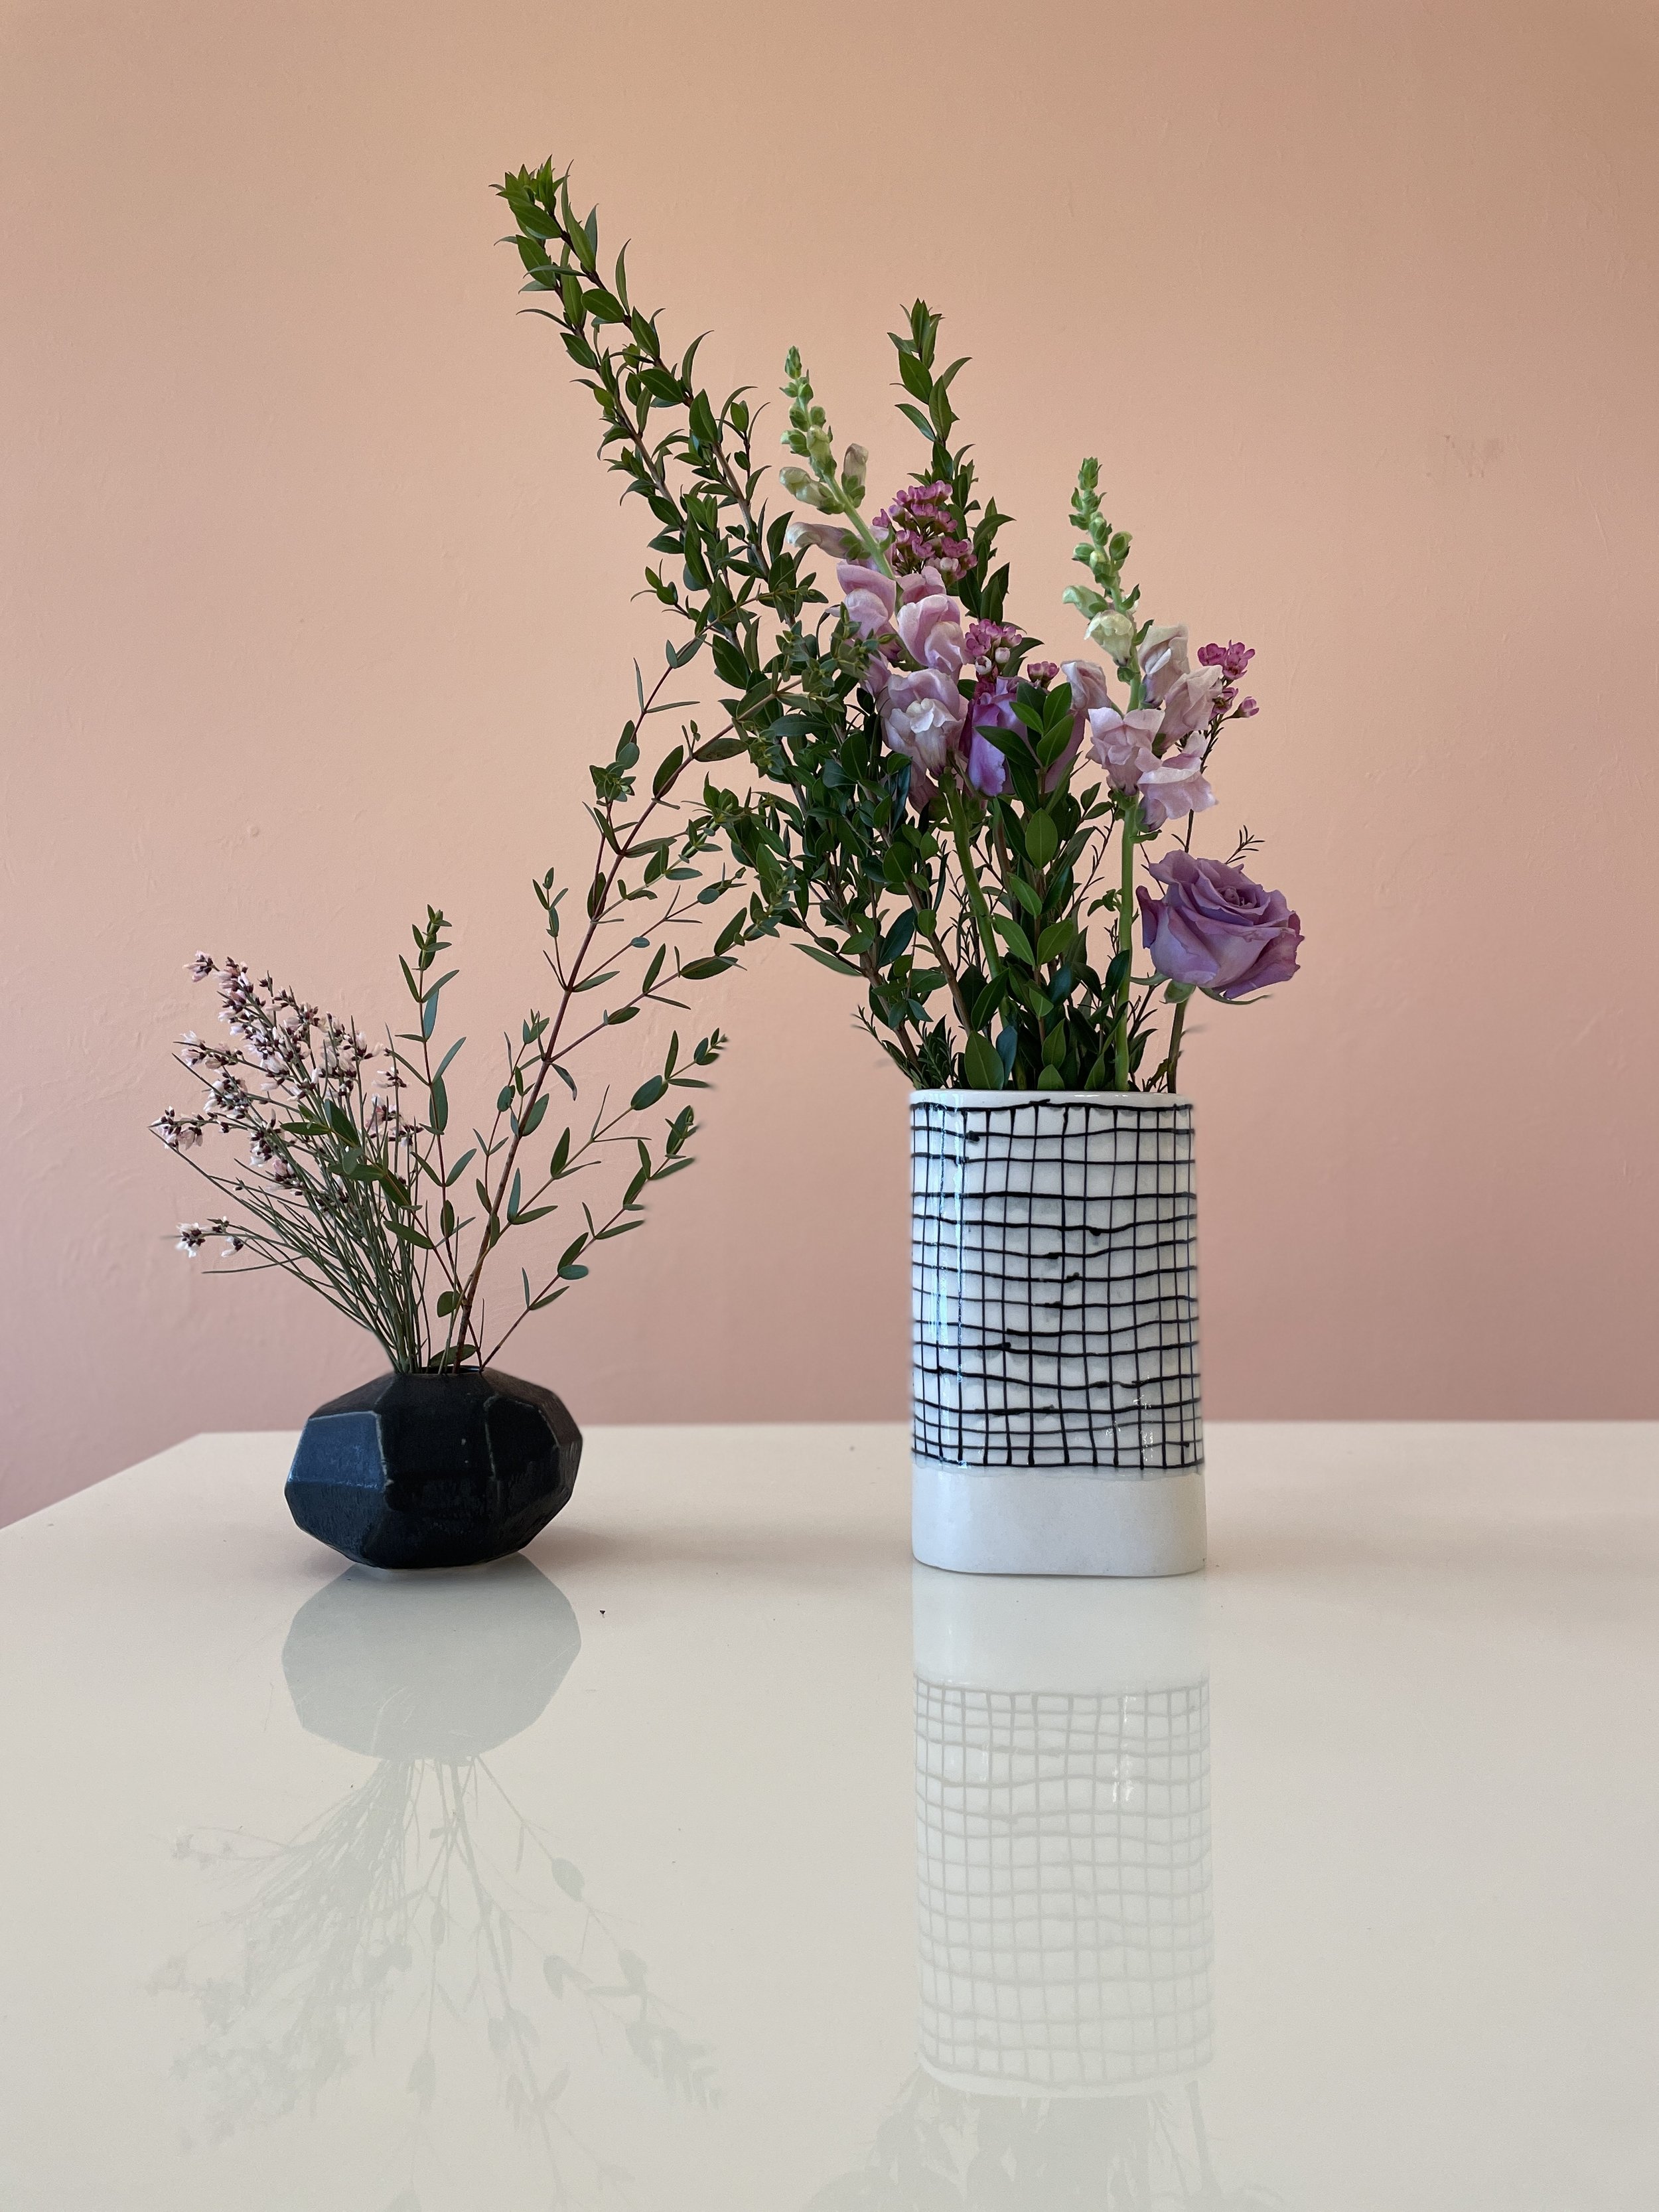  One small, black geometric greenery vase and one tall, white grid design vase with flowers in it made by Lauren HB Studio 